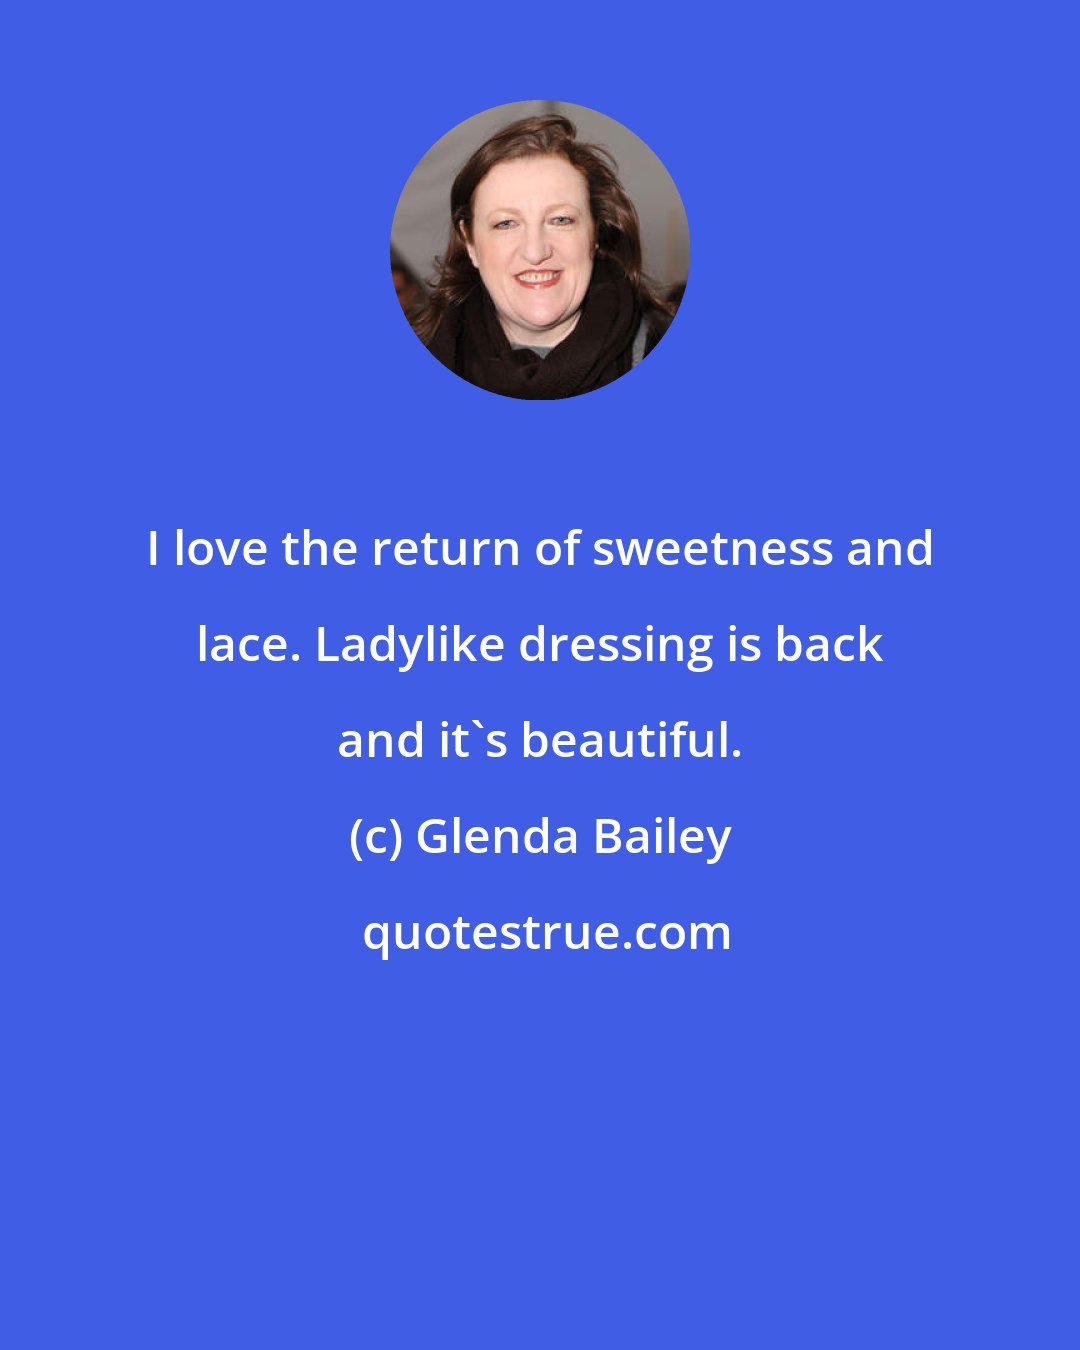 Glenda Bailey: I love the return of sweetness and lace. Ladylike dressing is back and it's beautiful.